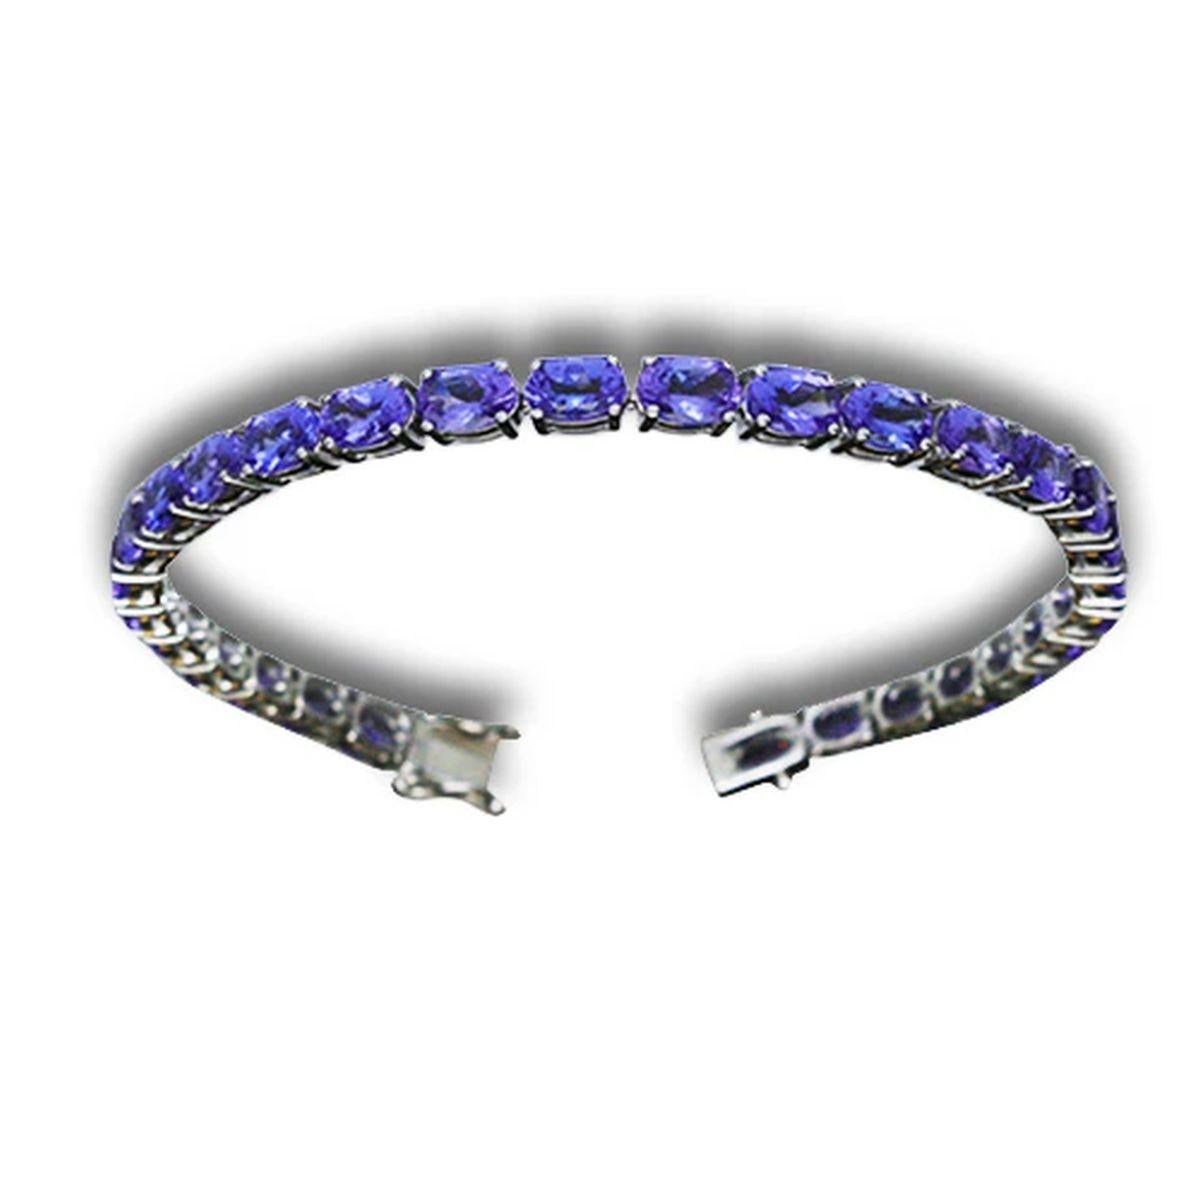 Simply Beautiful! Stylish and finely detailed Vintage Oscar Worthy Tanzanite and Diamond Gold Bracelet. Securely Hand set with 29 Oval Blue/Violet Tanzanite I/F High Quality Gemstones, weighing approx. 12.80tcw. Securely Hand crafted in 14K White